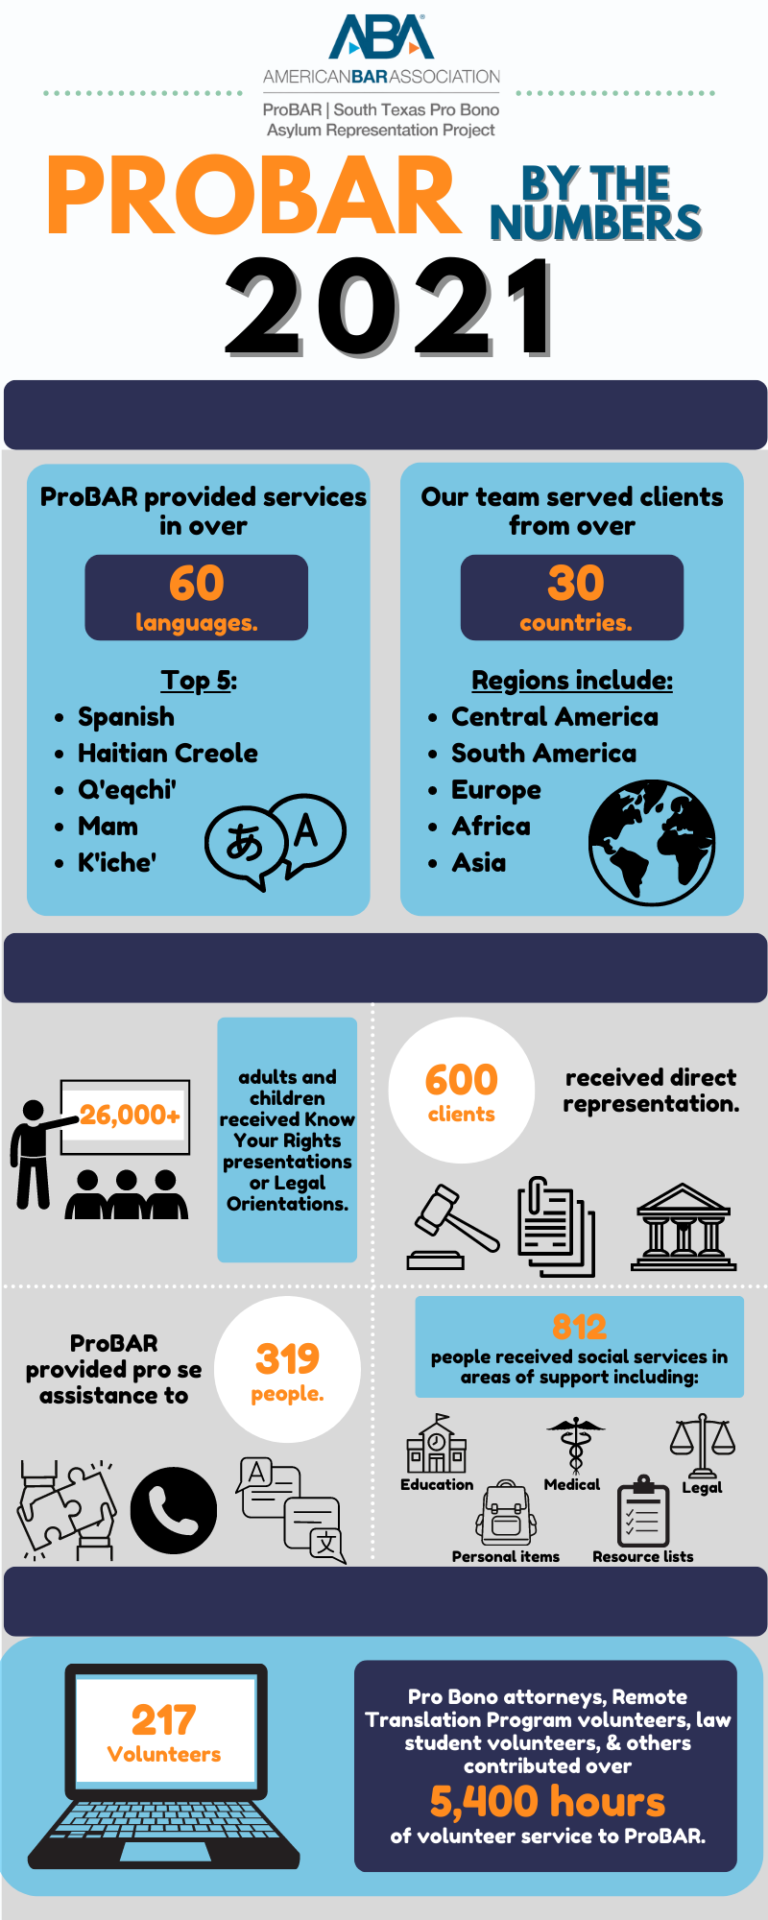 ProBAR by the Numbers 2021 ProBAR provided services in over 60 languages. Top 5: Spanish Haitian Creole Q'eqchi' Mam K'iche' Our team served clients from over 30 countries. Regions included: Central America South America Europe Africa Asia 26,000+ adults and children received Know Your Rights presentations or Legal Orientations. 600 received direct representation. ProBAR provided pro se assistance to 319 people. 812 people received social services in areas of support including: education, medical, legal, personal items, resource lists. 217 Volunteers. Pro bono attorneys, Remote, Translation Program volunteers, law student volunteers, and others contributed over 5,400 hours of volunteer service to ProBAR.